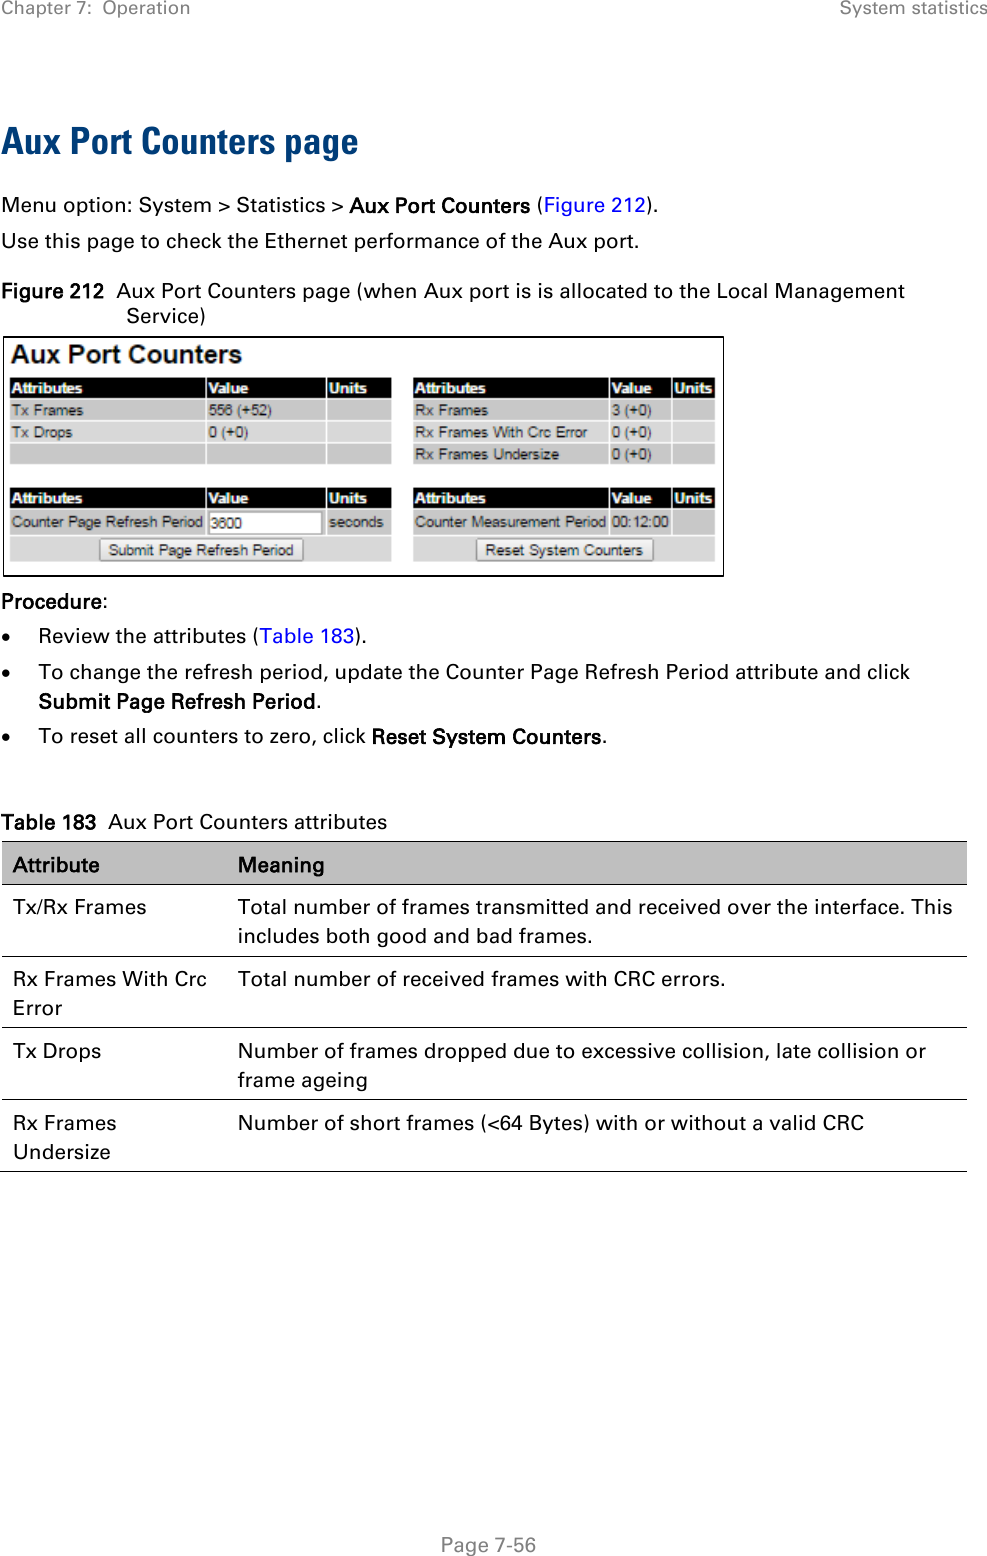 Chapter 7:  Operation System statistics  Aux Port Counters page Menu option: System &gt; Statistics &gt; Aux Port Counters (Figure 212). Use this page to check the Ethernet performance of the Aux port. Figure 212  Aux Port Counters page (when Aux port is is allocated to the Local Management Service)  Procedure: • Review the attributes (Table 183). • To change the refresh period, update the Counter Page Refresh Period attribute and click Submit Page Refresh Period. • To reset all counters to zero, click Reset System Counters.  Table 183  Aux Port Counters attributes Attribute Meaning Tx/Rx Frames  Total number of frames transmitted and received over the interface. This includes both good and bad frames. Rx Frames With Crc Error Total number of received frames with CRC errors. Tx Drops Number of frames dropped due to excessive collision, late collision or frame ageing Rx Frames Undersize Number of short frames (&lt;64 Bytes) with or without a valid CRC   Page 7-56 